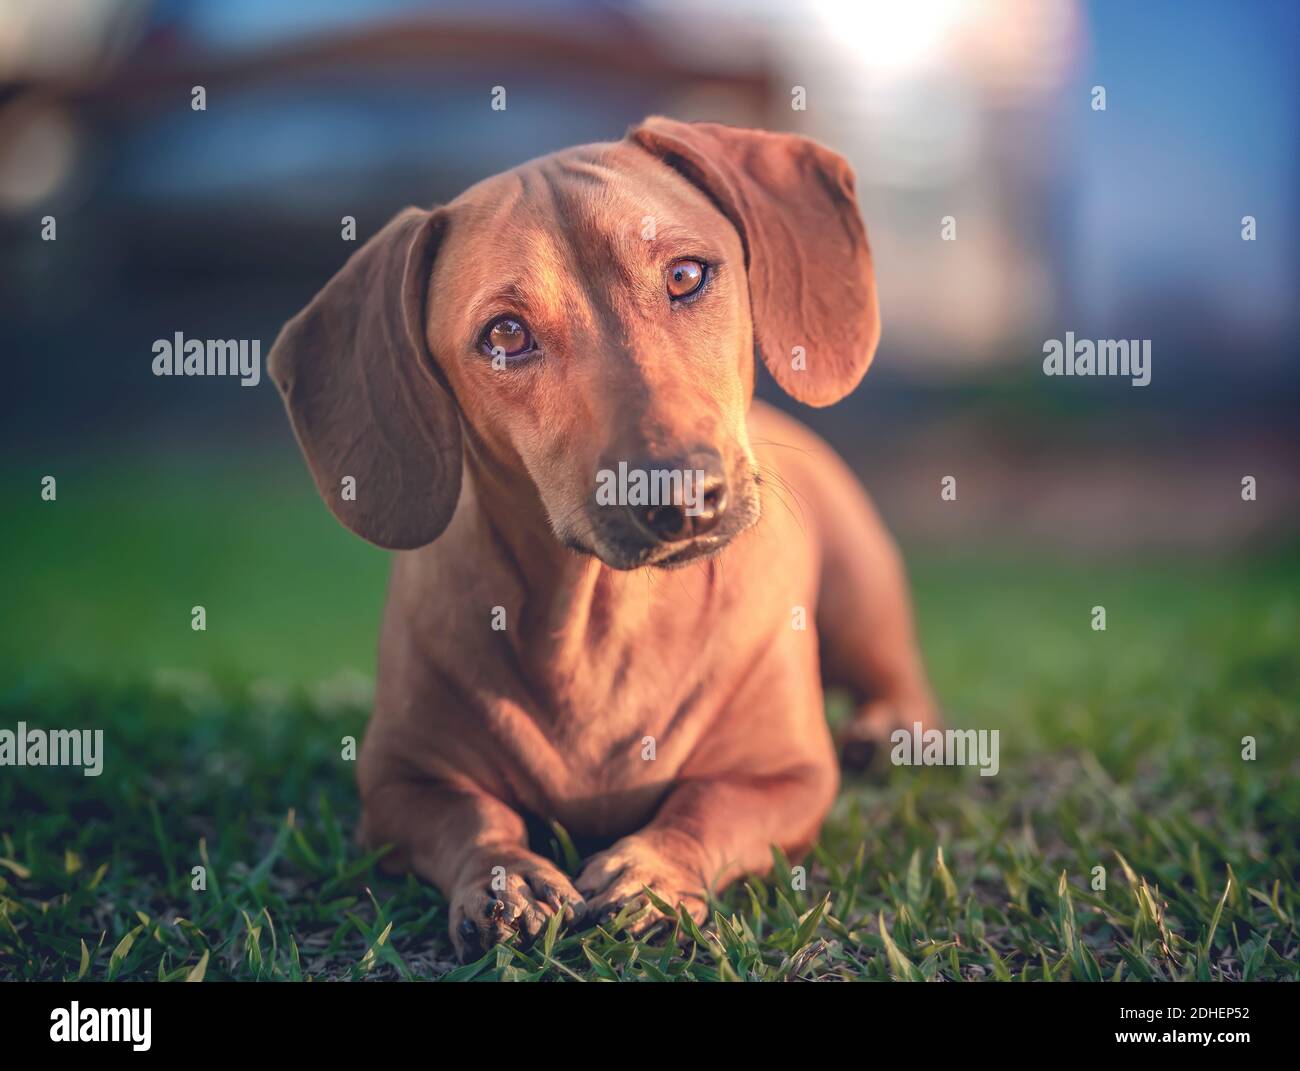 Dog in the grass under sunset looking at the camera. Stock Photo